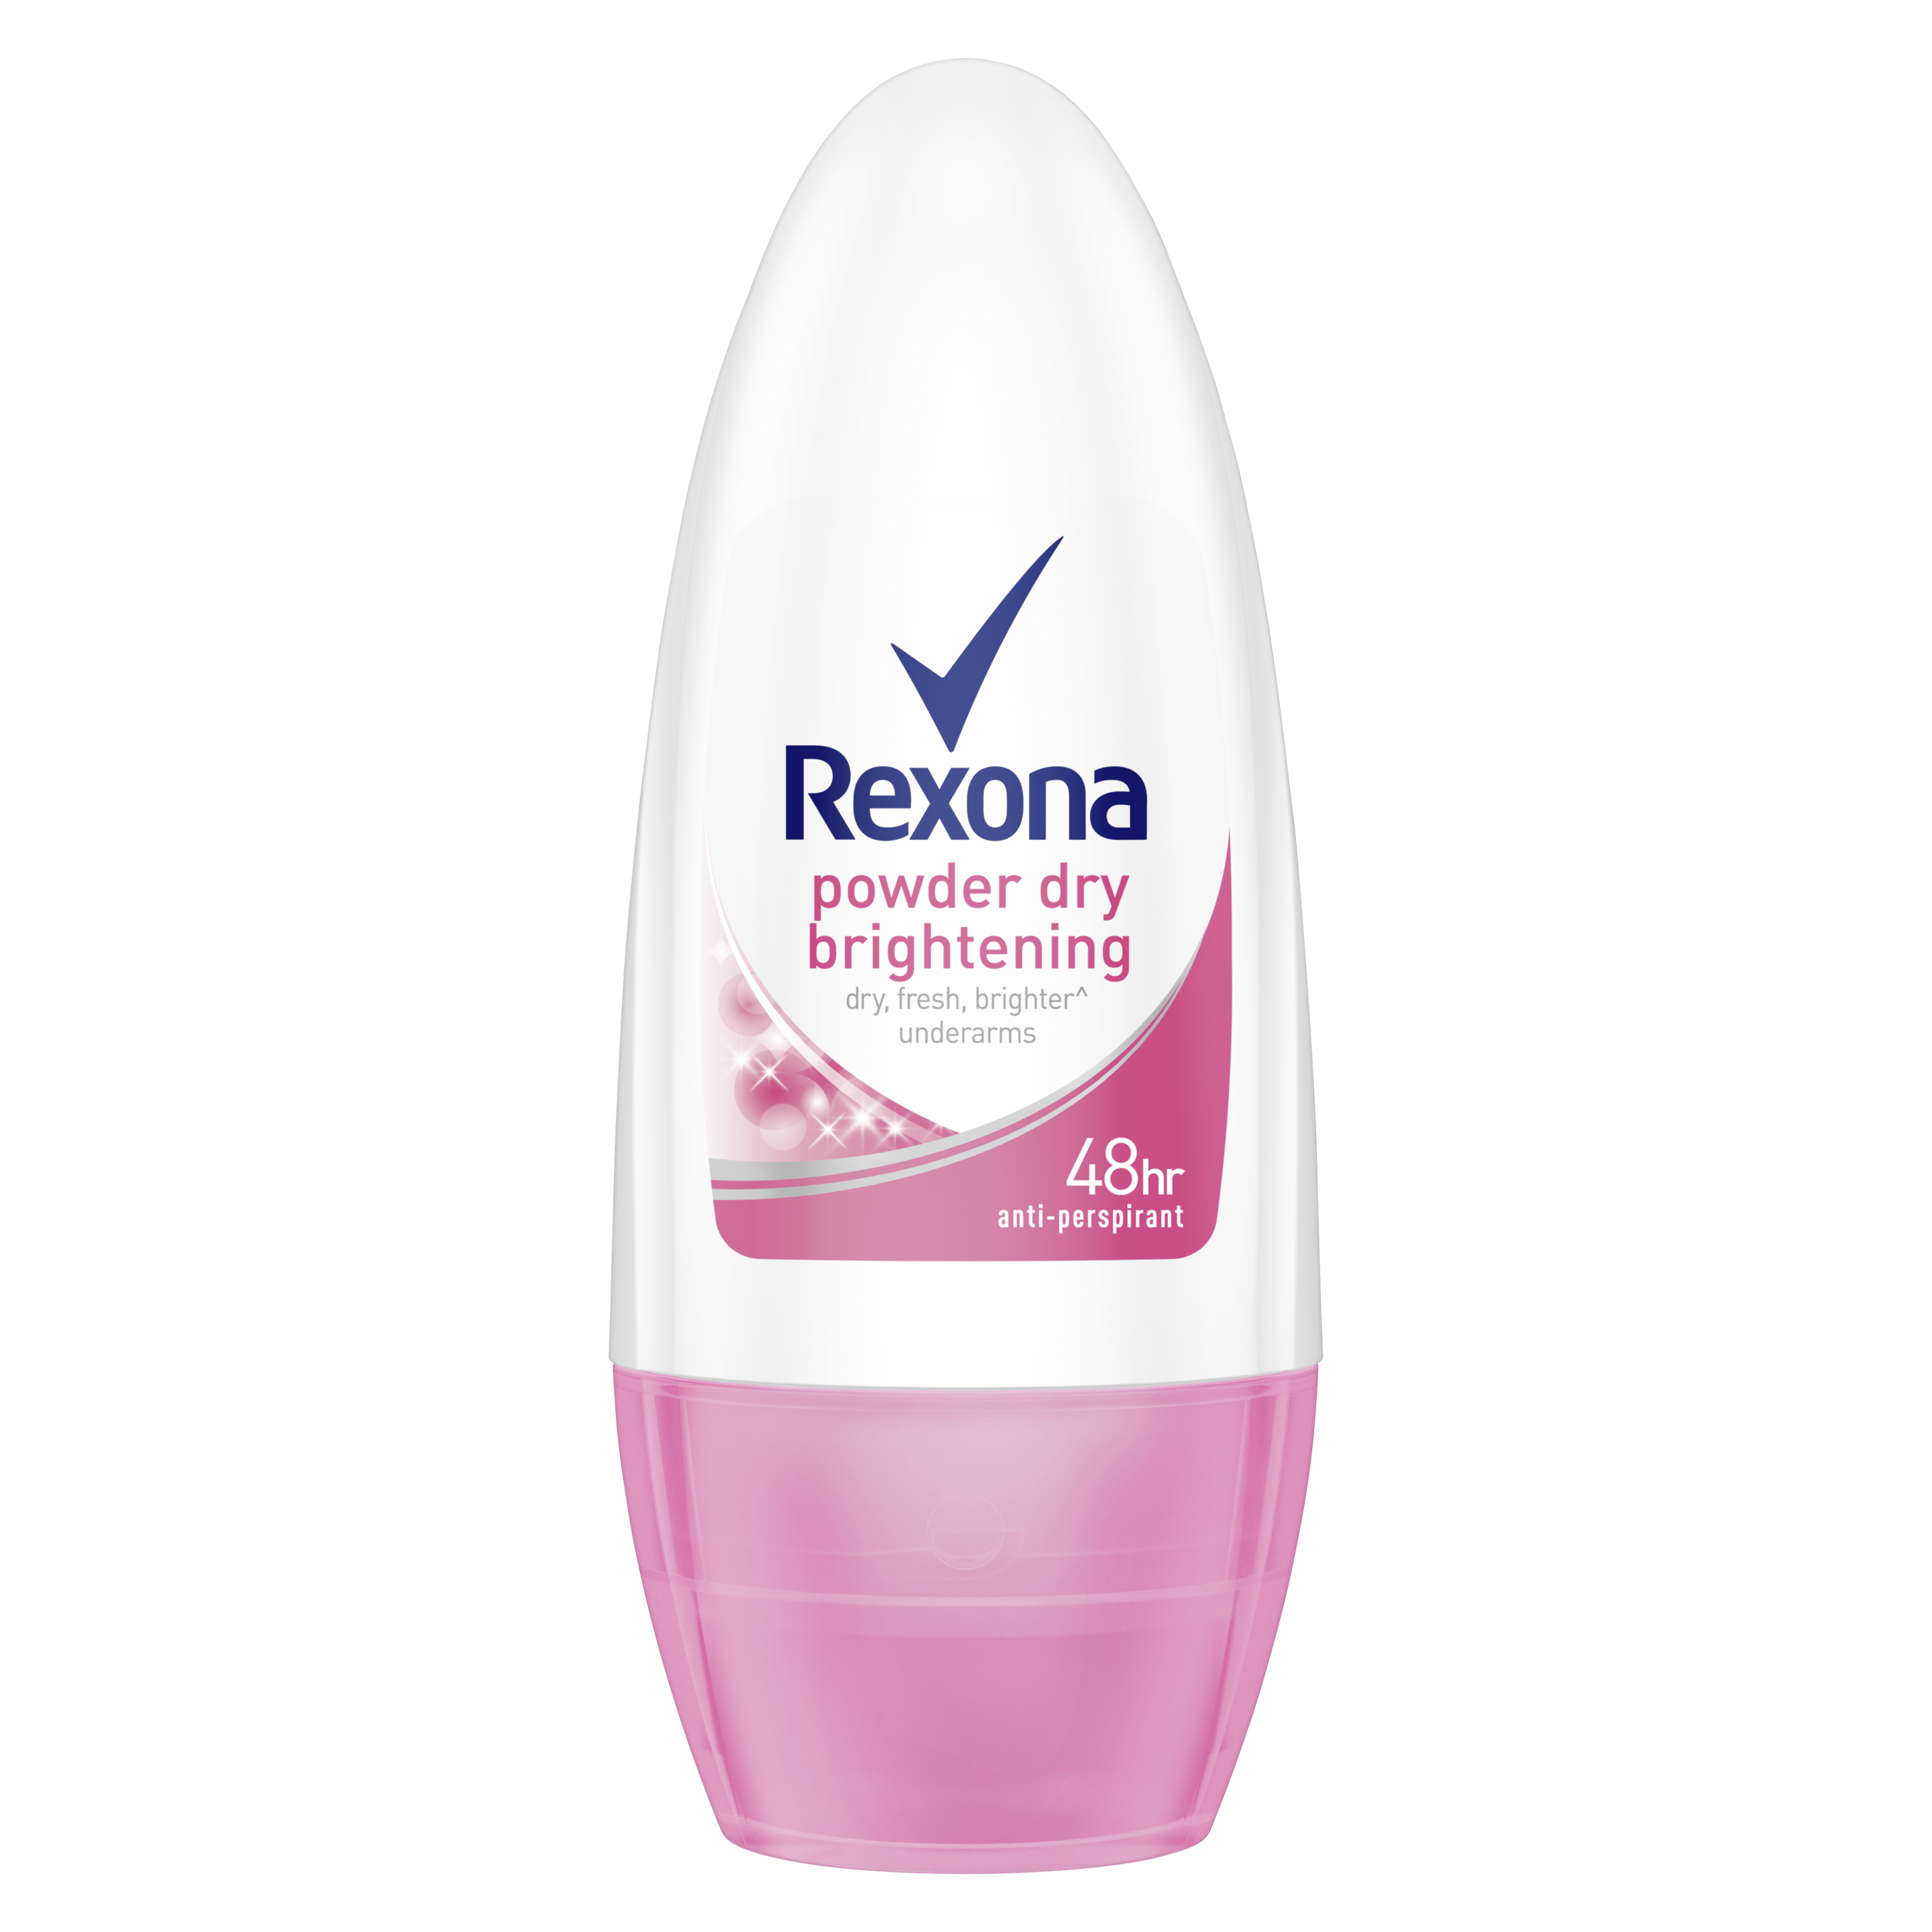 Rexona Powder Dry + Brightening Roll-on | Home Page